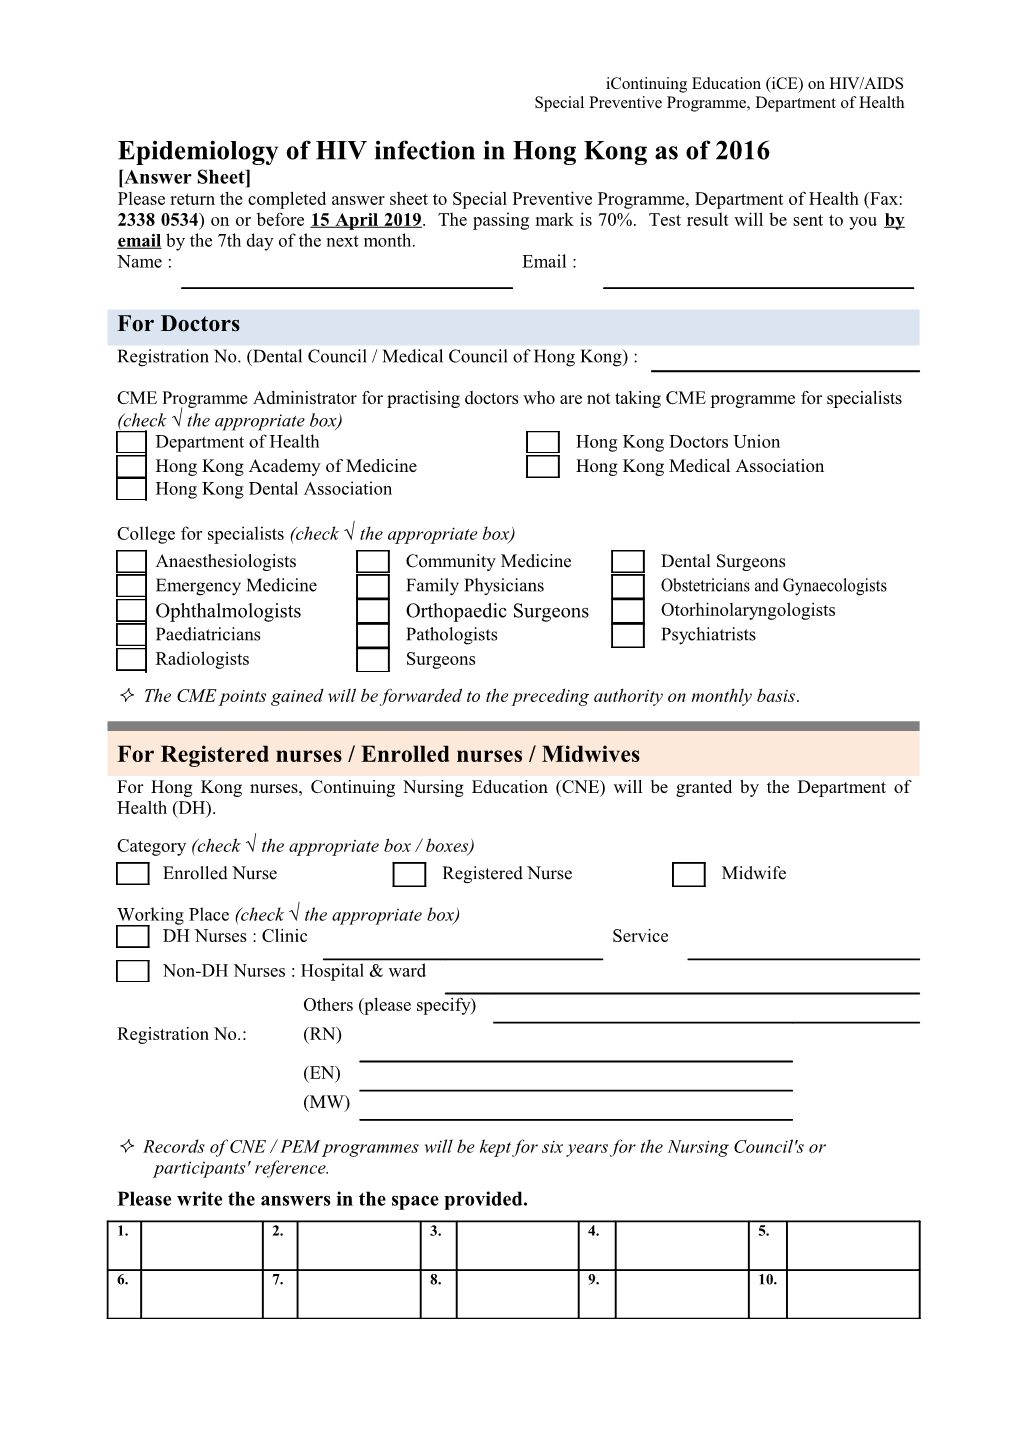 Answer Sheet - Immune Recovery of Middle-Aged HIV Patients Following Antiretroviral Therapy